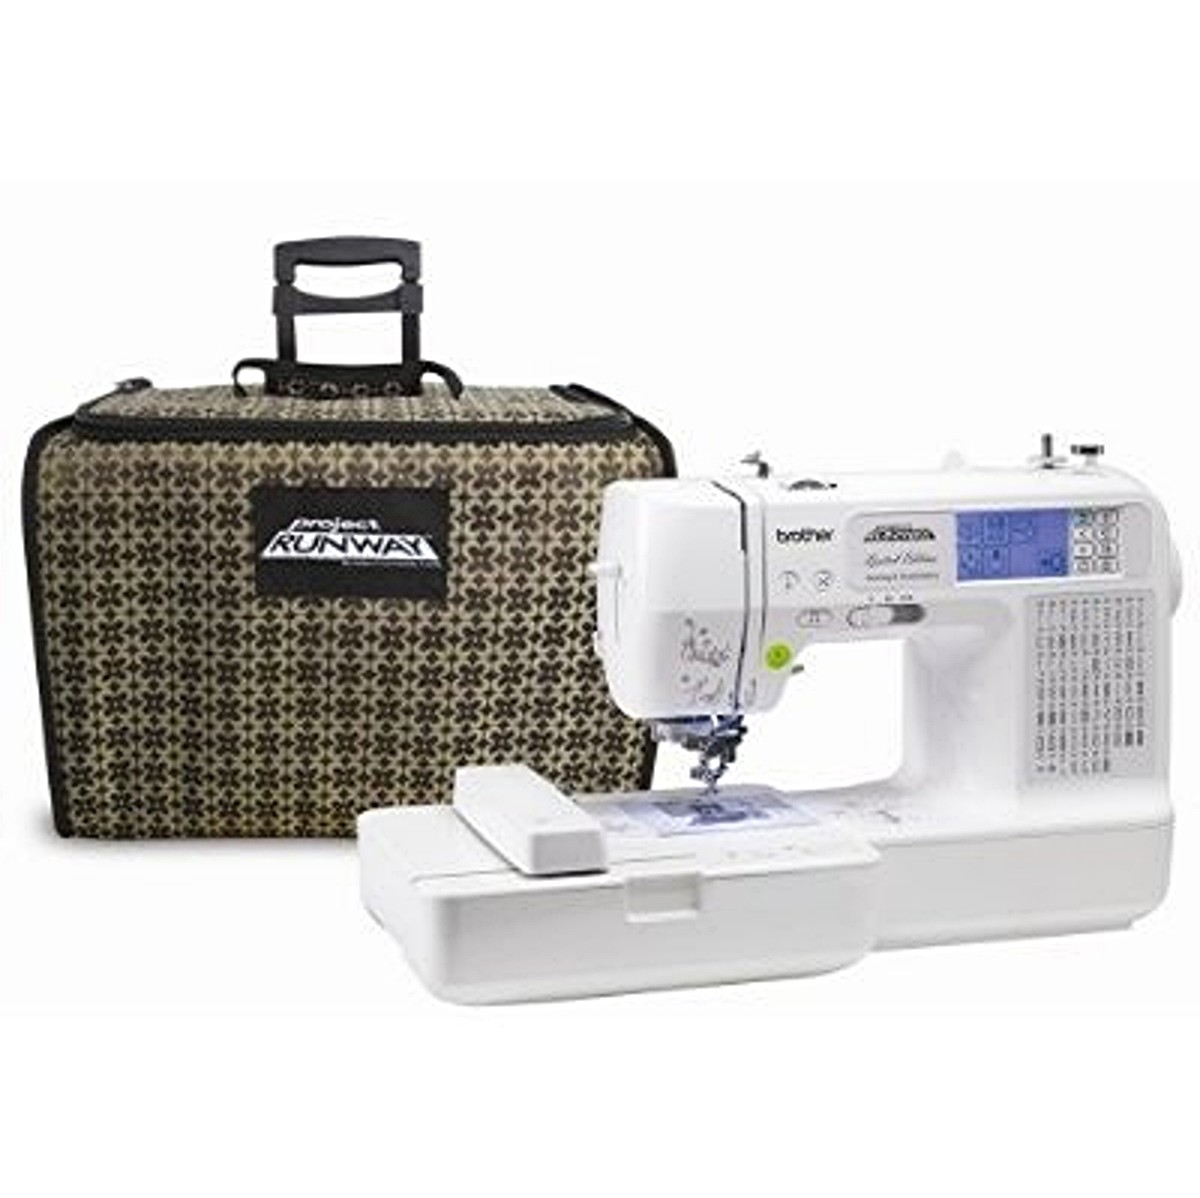 Compare The Brother Se 350 Se 400 Lb6770prw And Lb6800prw Sewing Machines Erin Says Sew